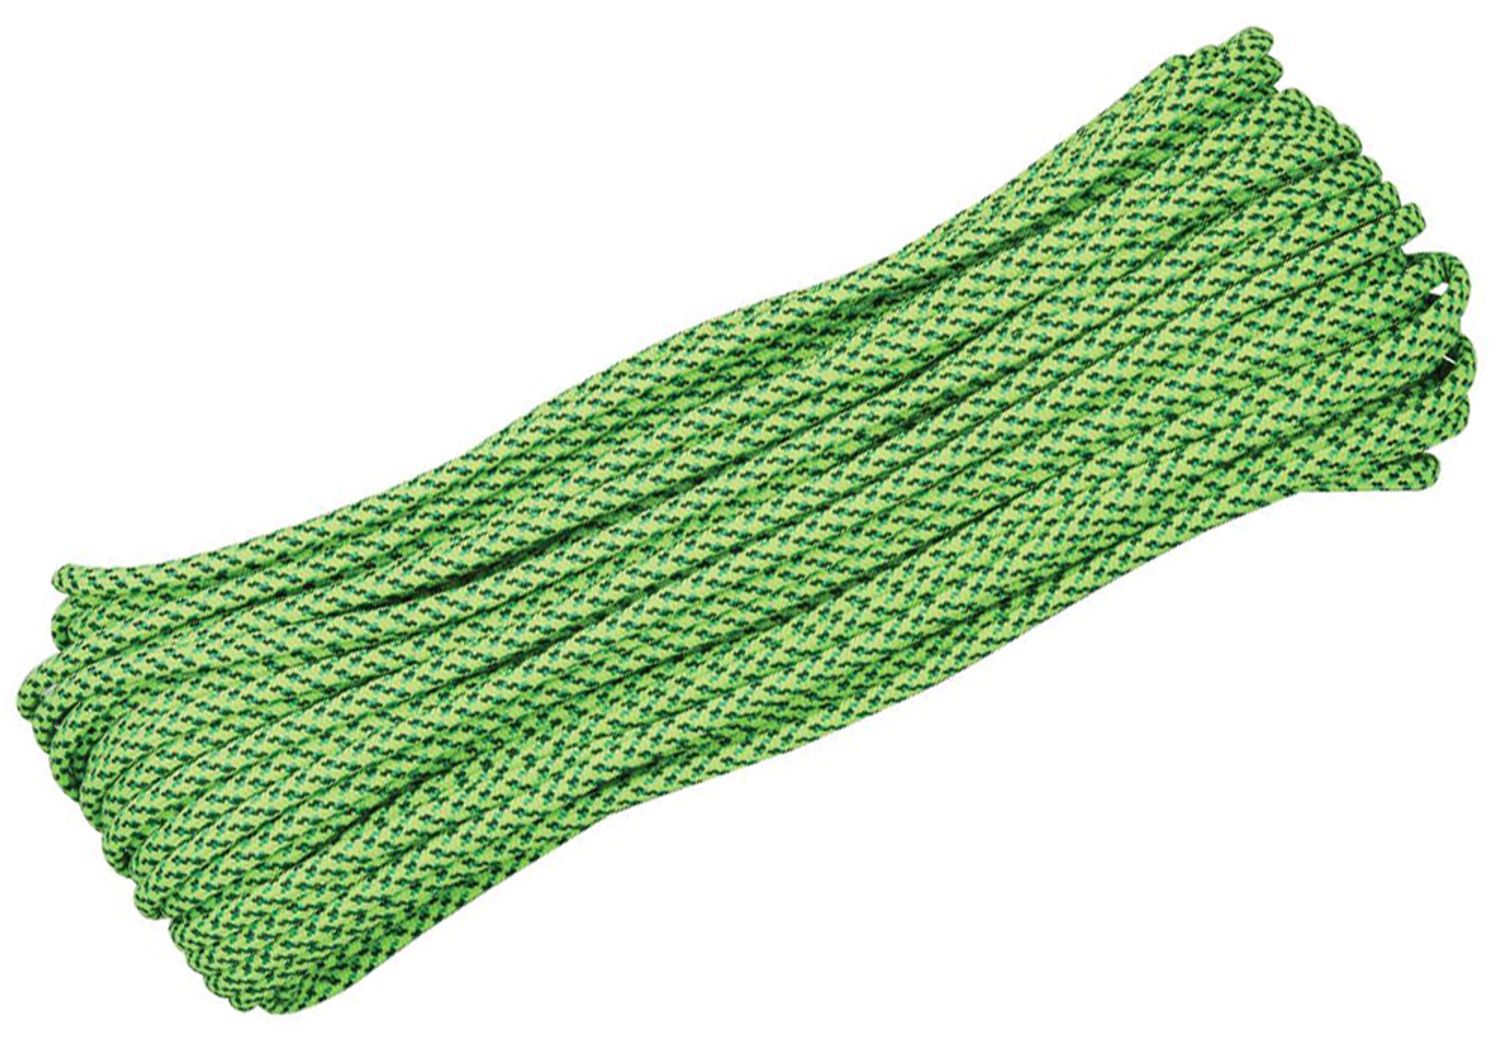 Atwood Rope 550 Paracord, Green Speck, 100 Feet - KnifeCenter - RG112H